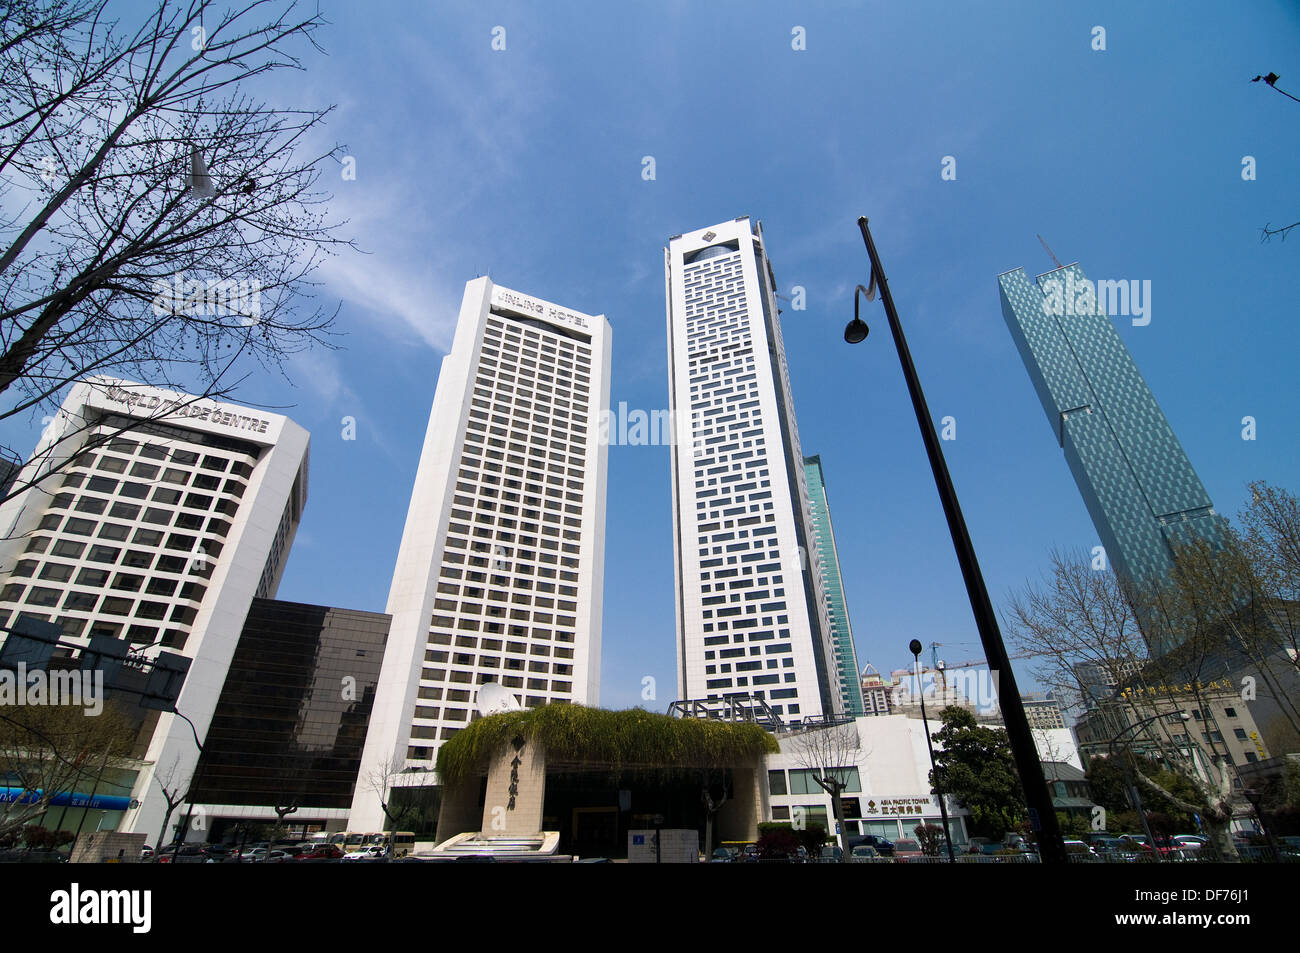 The Jinling hotel in Nanjing with its new tower. Stock Photo